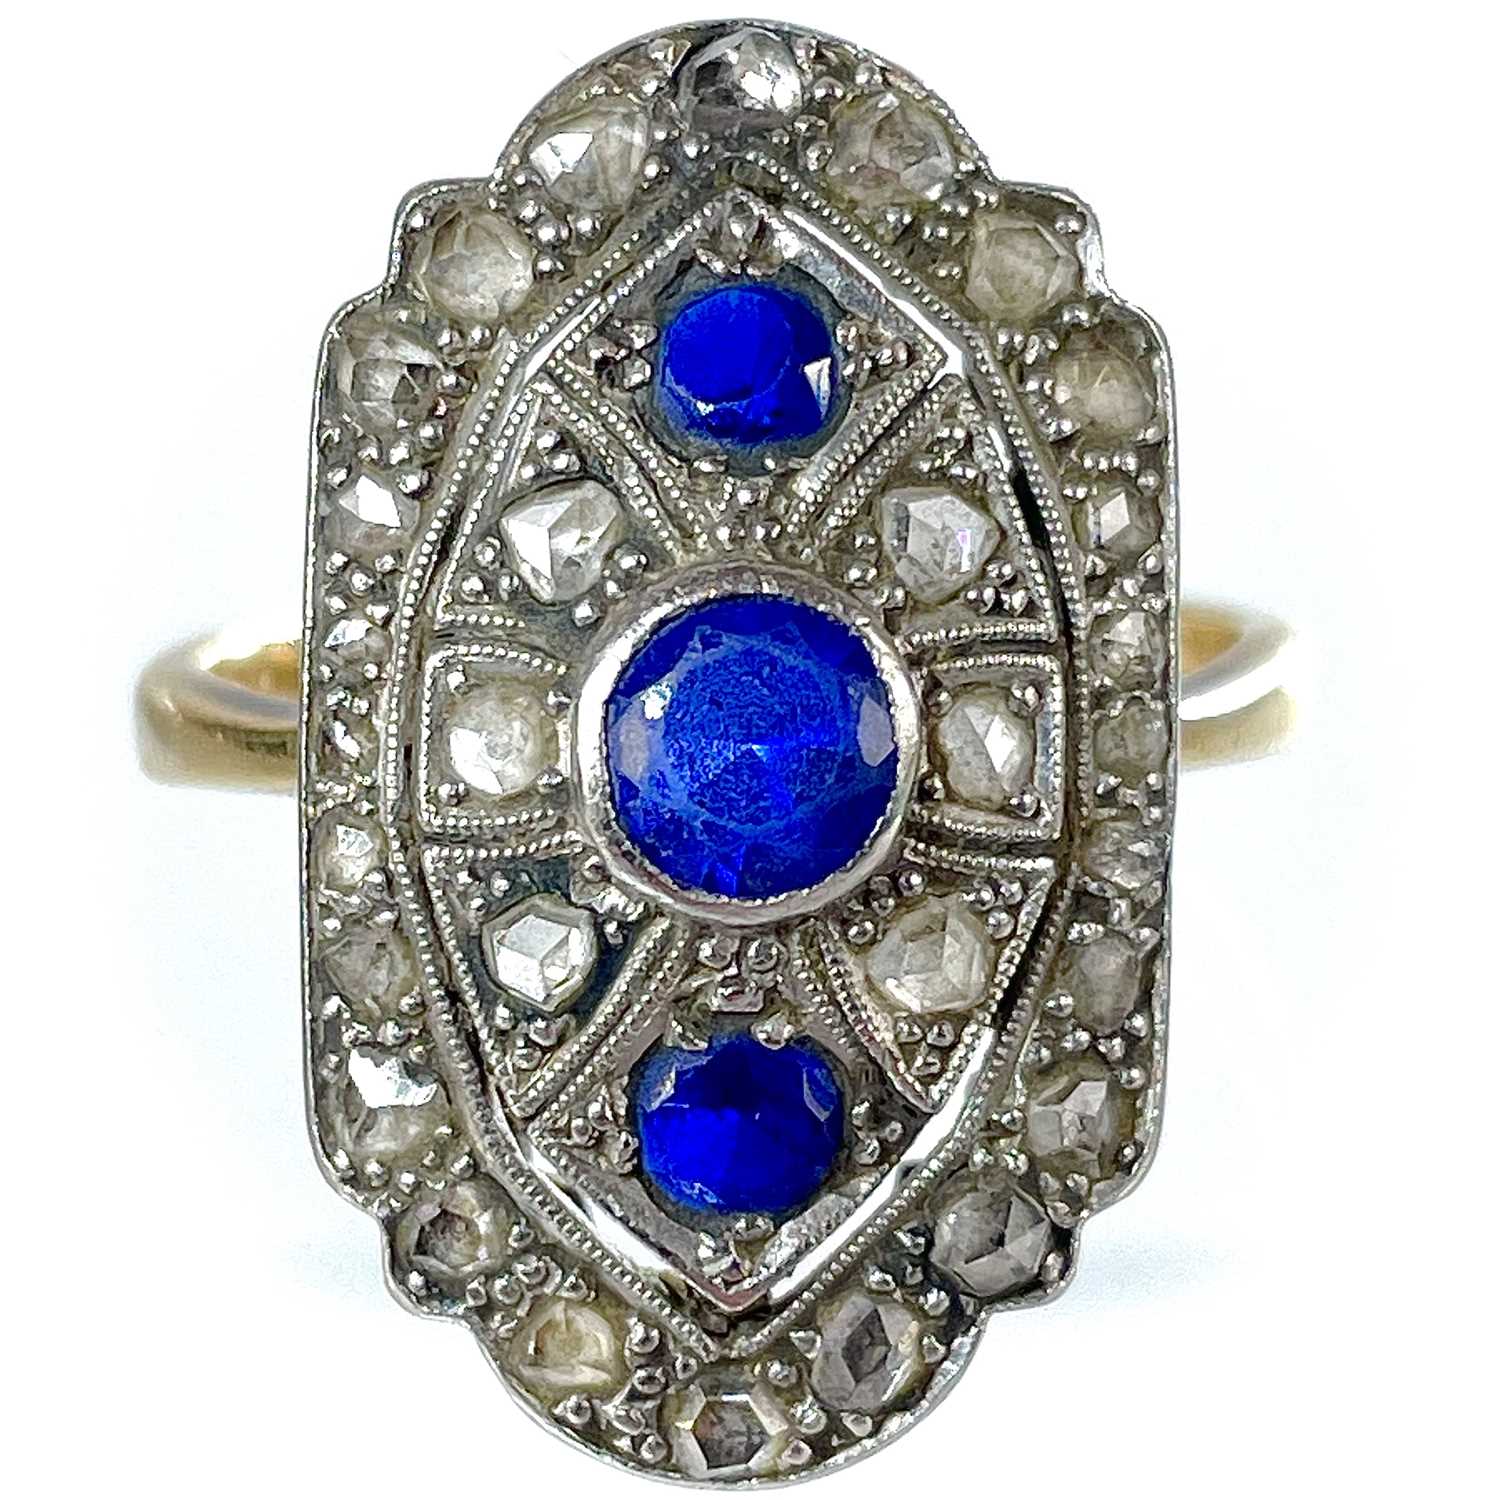 A stylish Art Deco period 18ct yellow and white gold diamond and sapphire panel ring. - Image 10 of 12